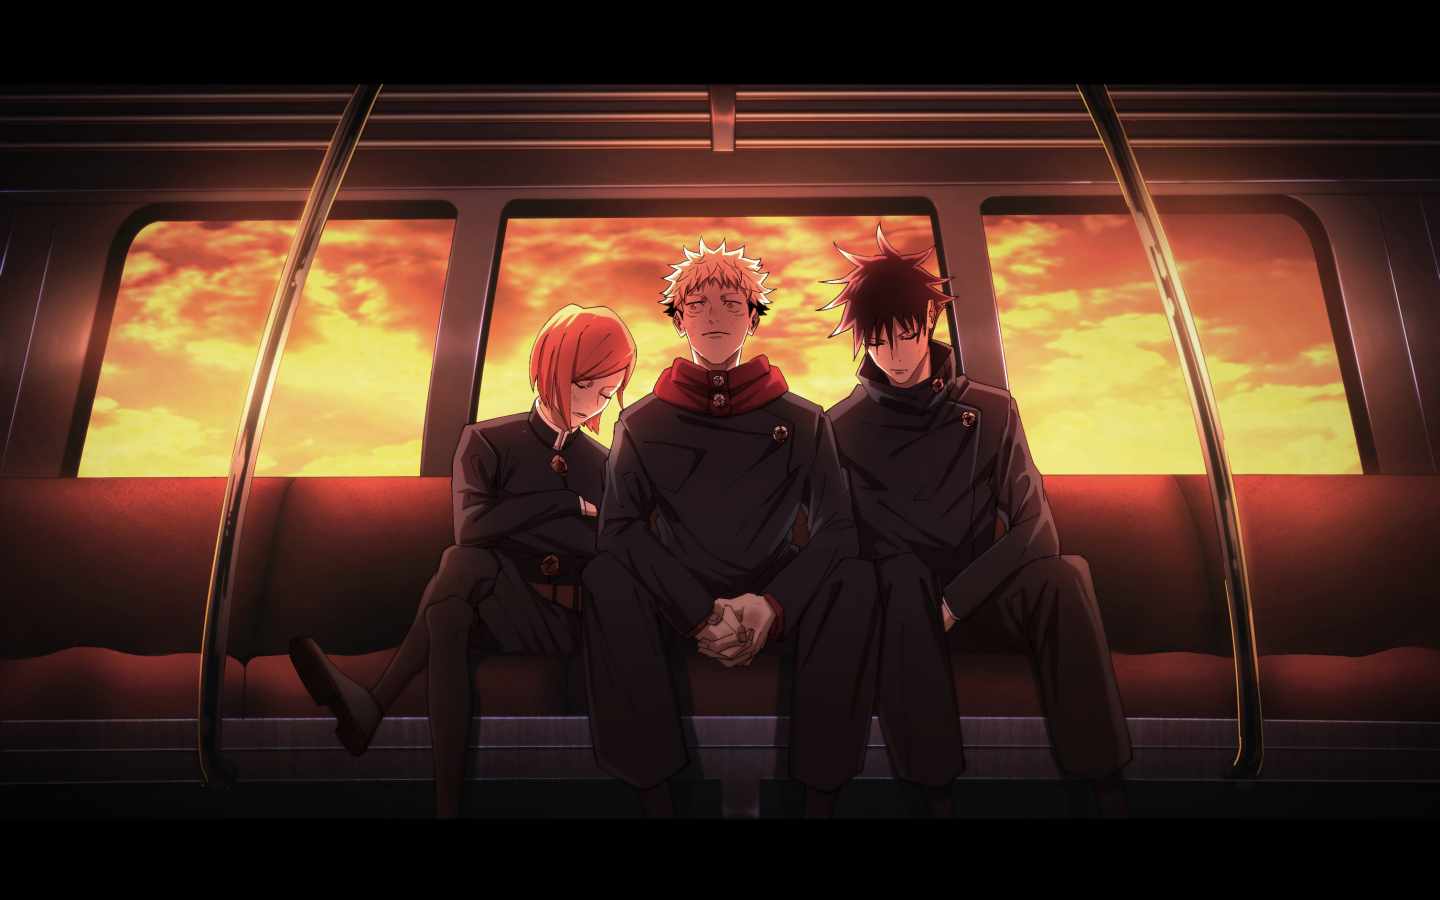 1440x900 Jujutsu Kaisen Characters 1440x900 Wallpaper Hd Anime 4k Wallpapers Images Photos And Background Wallpapers Den